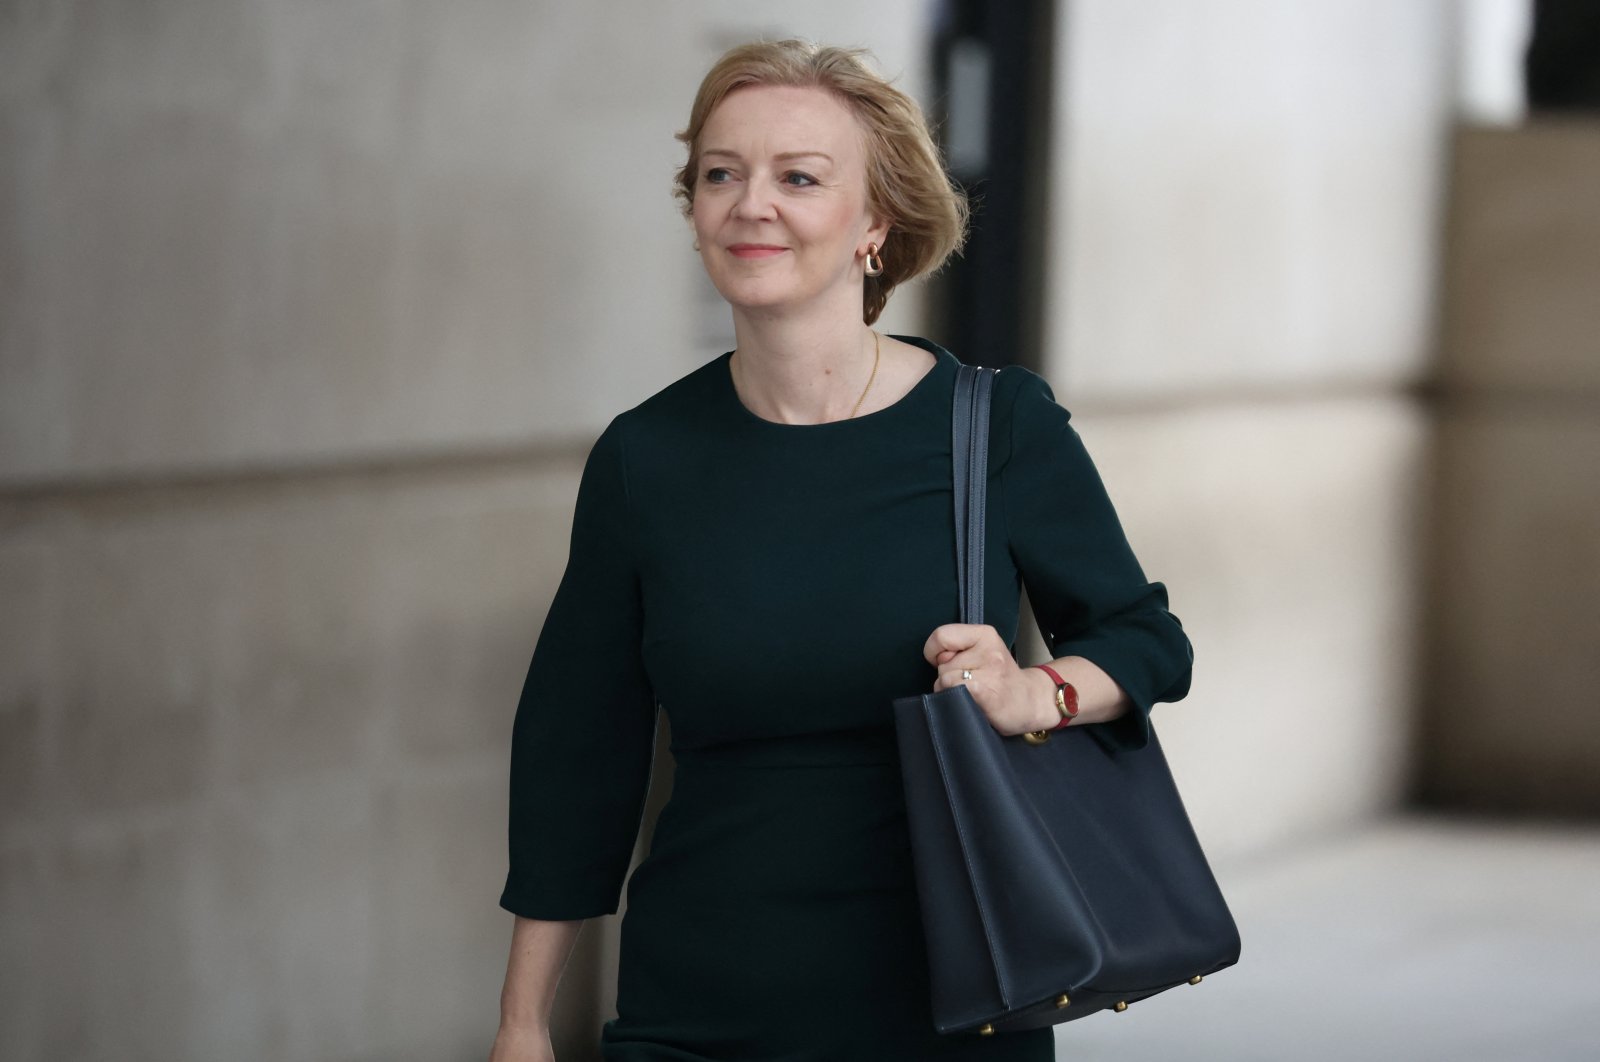 Conservative leadership candidate Liz Truss arrives at Broadcasting House ahead of her appearance on BBC&#039;s Sunday with Laura Kuenssberg show in London, Britain, Sept. 4, 2022. (Reuters Photo)